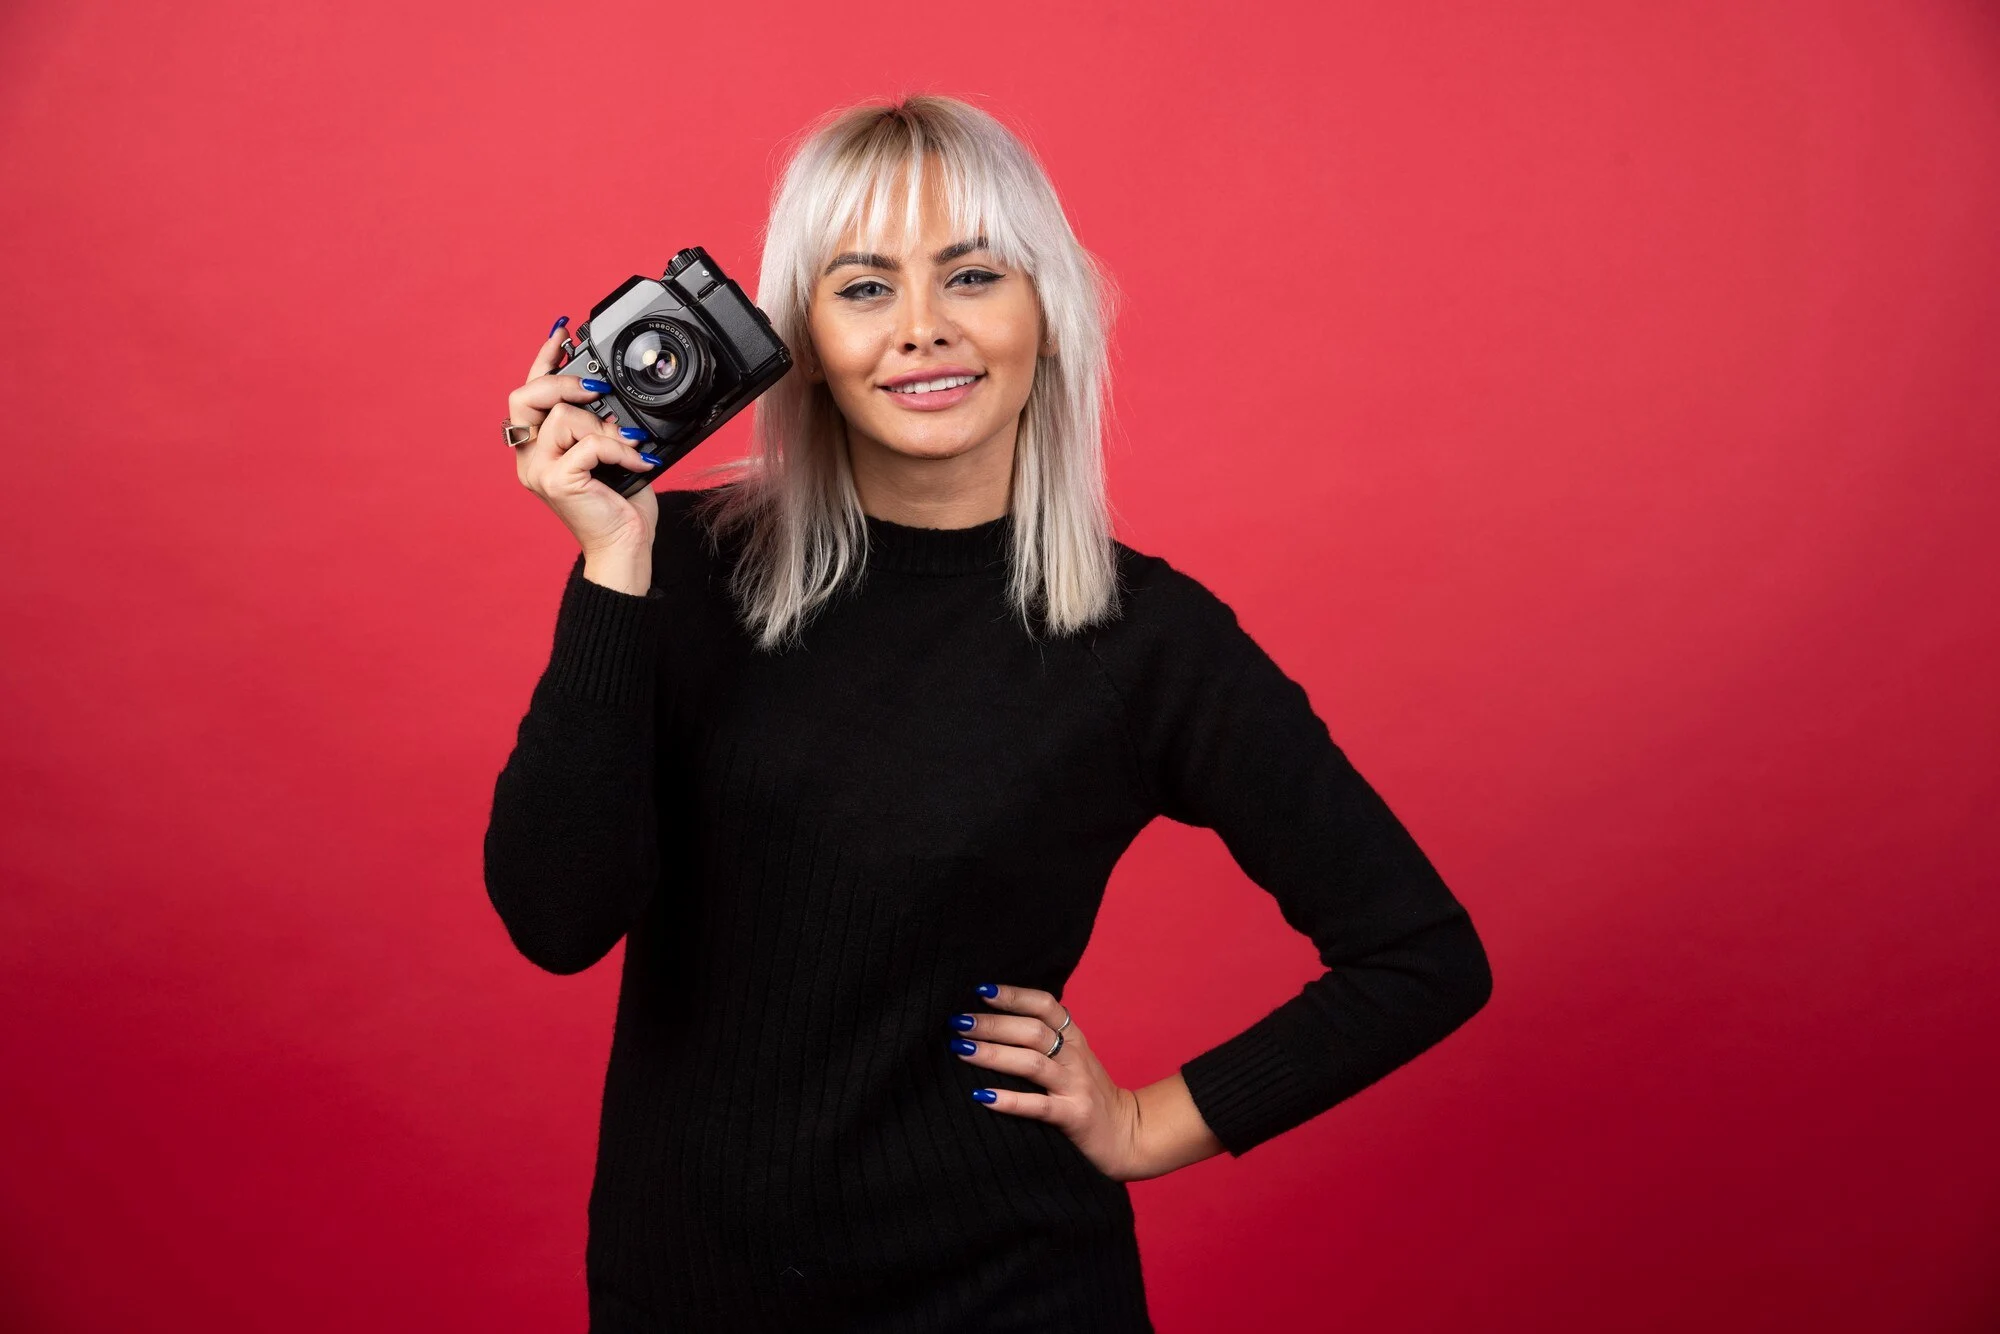 beautiful young woman holding camera while standing against red background high quality photo 114579 60838